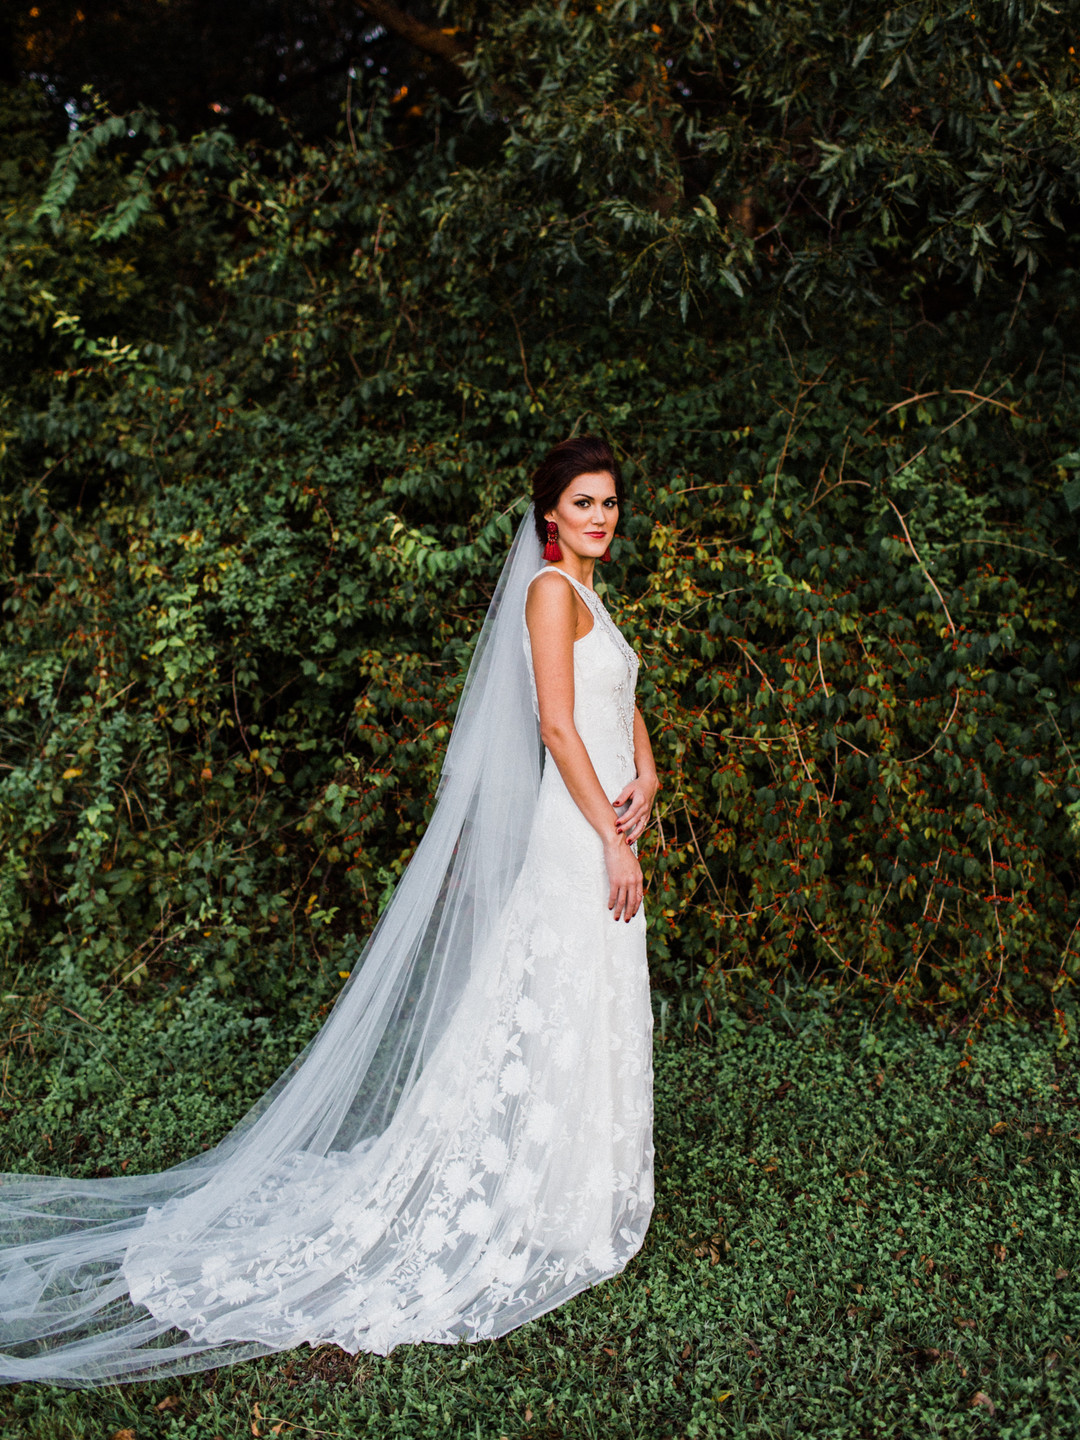 McCurdy_Bloom_LaurenBloomPhotography_MoodyDallasBridalsLaurenBloomPhotography22of37_big.jpg